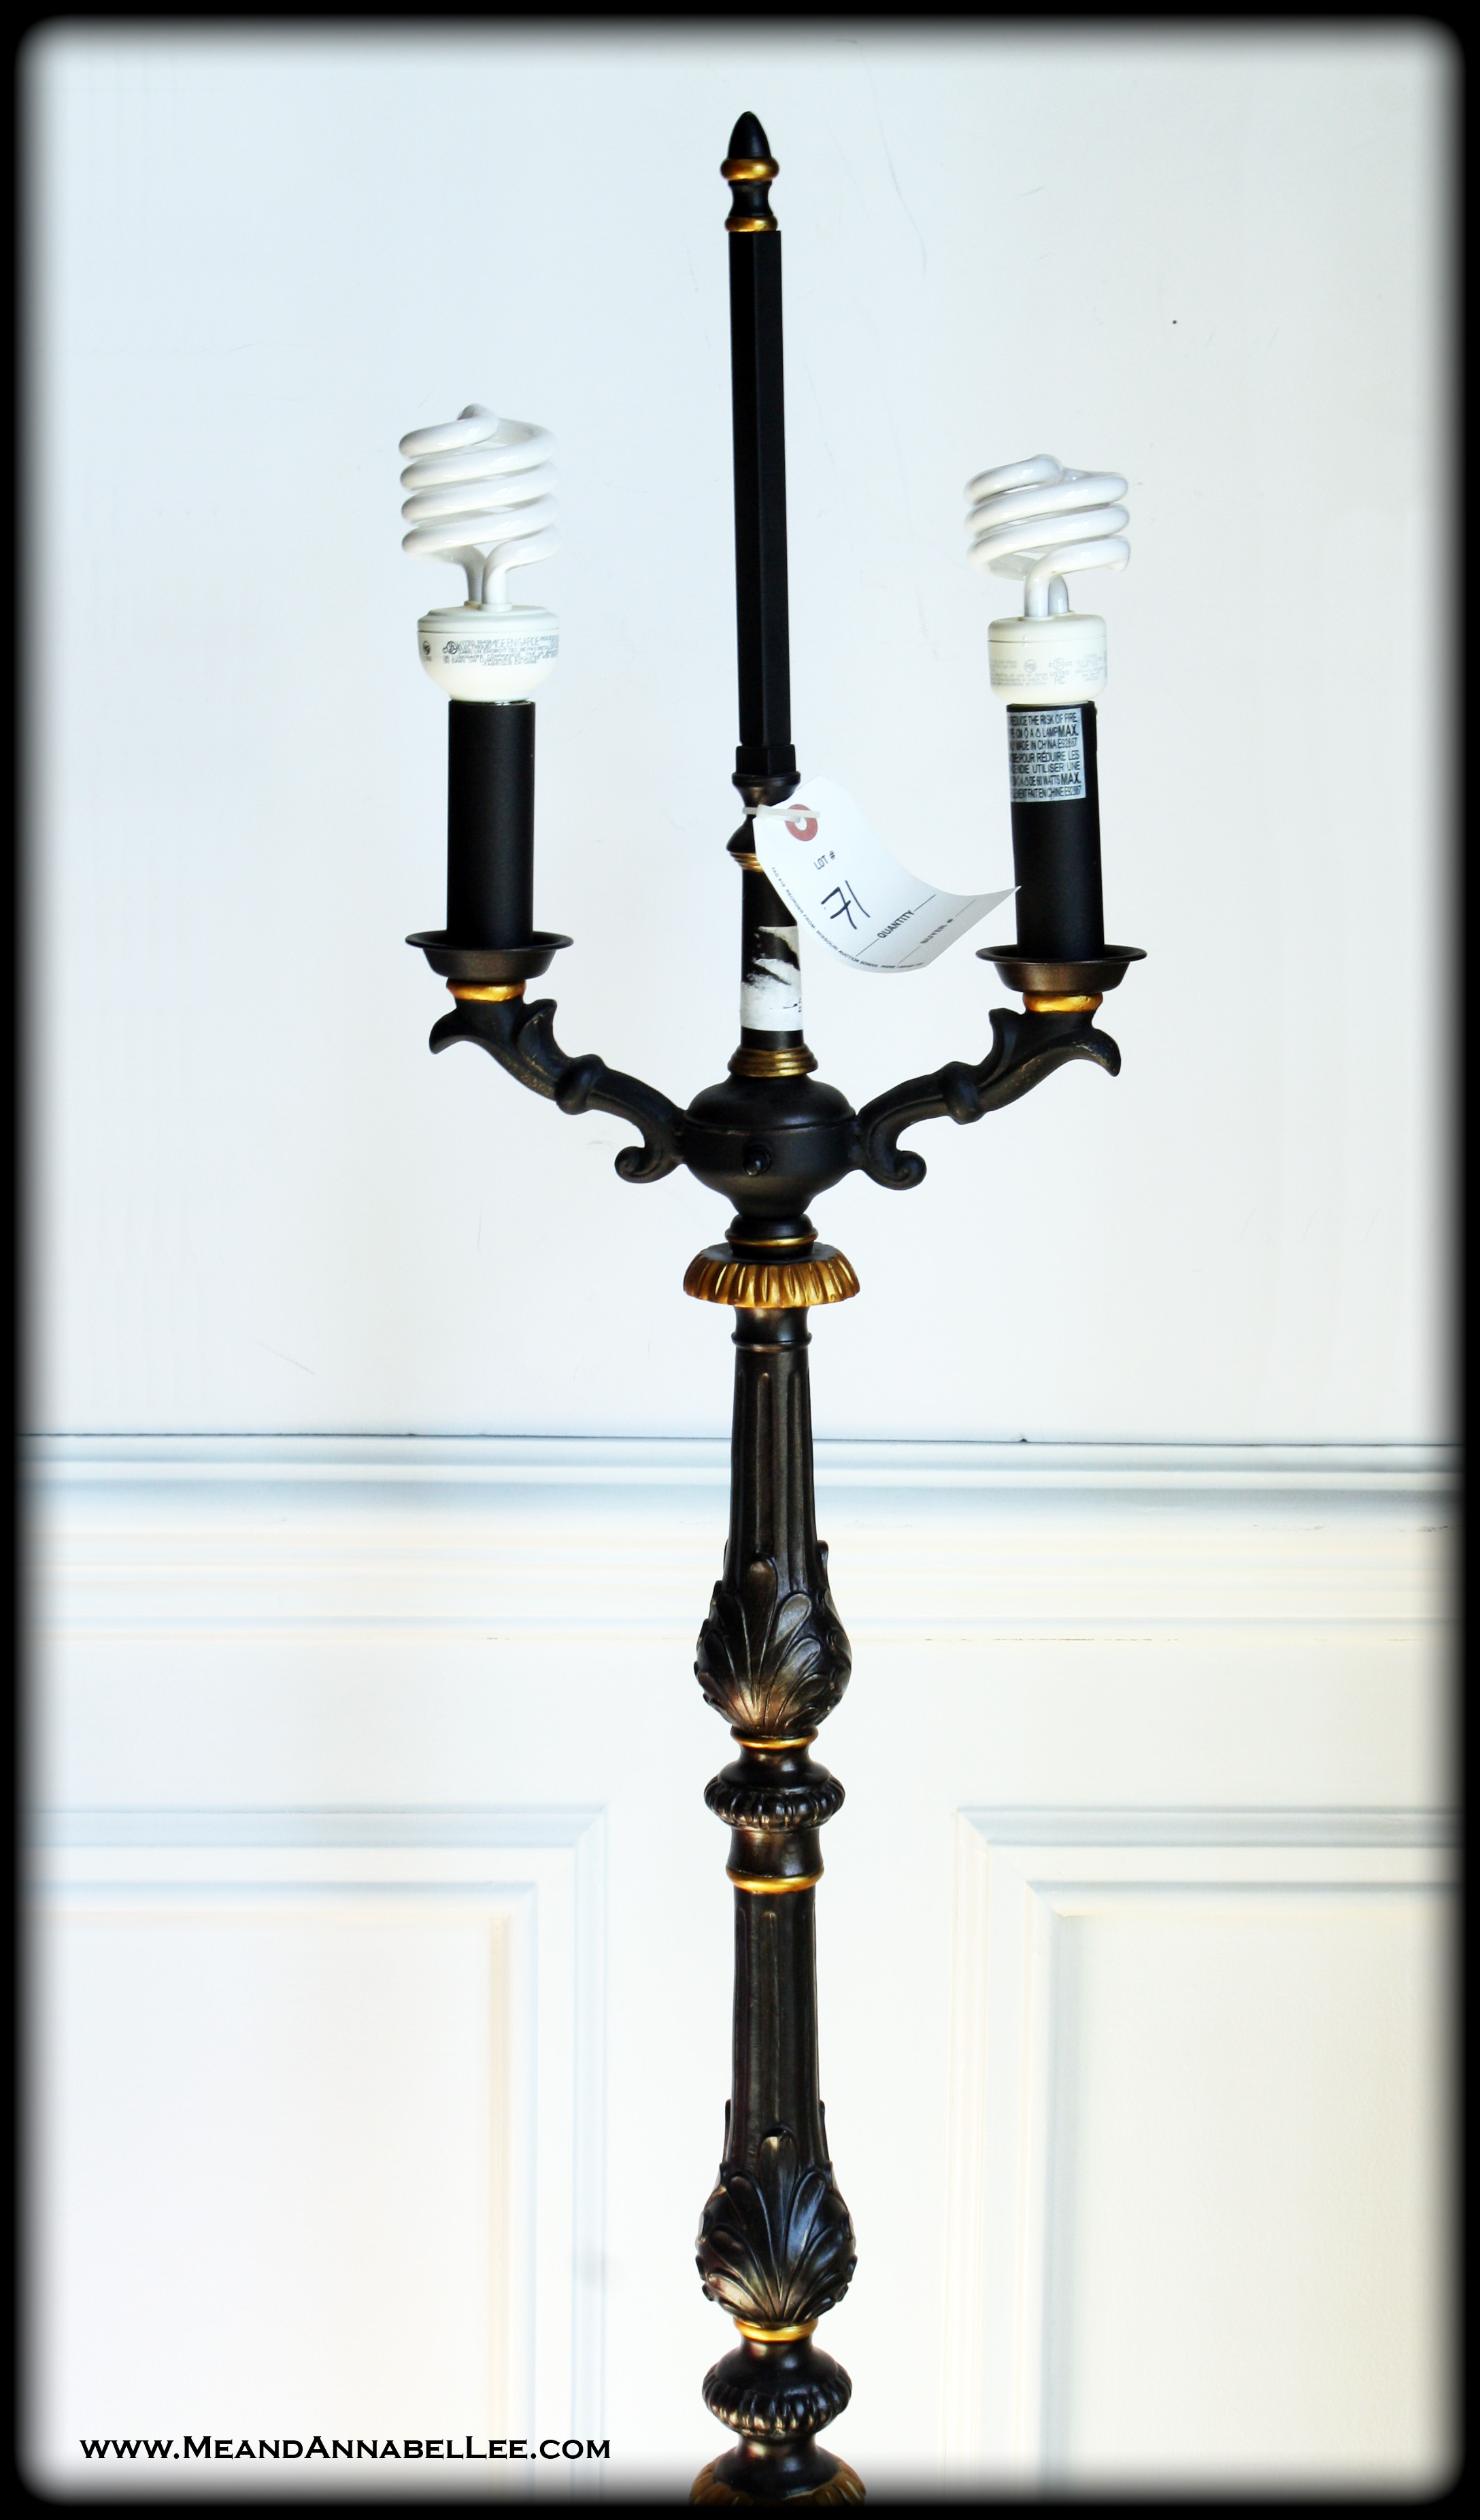 Transform a thrift store floor lamp with a goth it yourself DIY lamp shade | www.MeandAnnabelLee.com